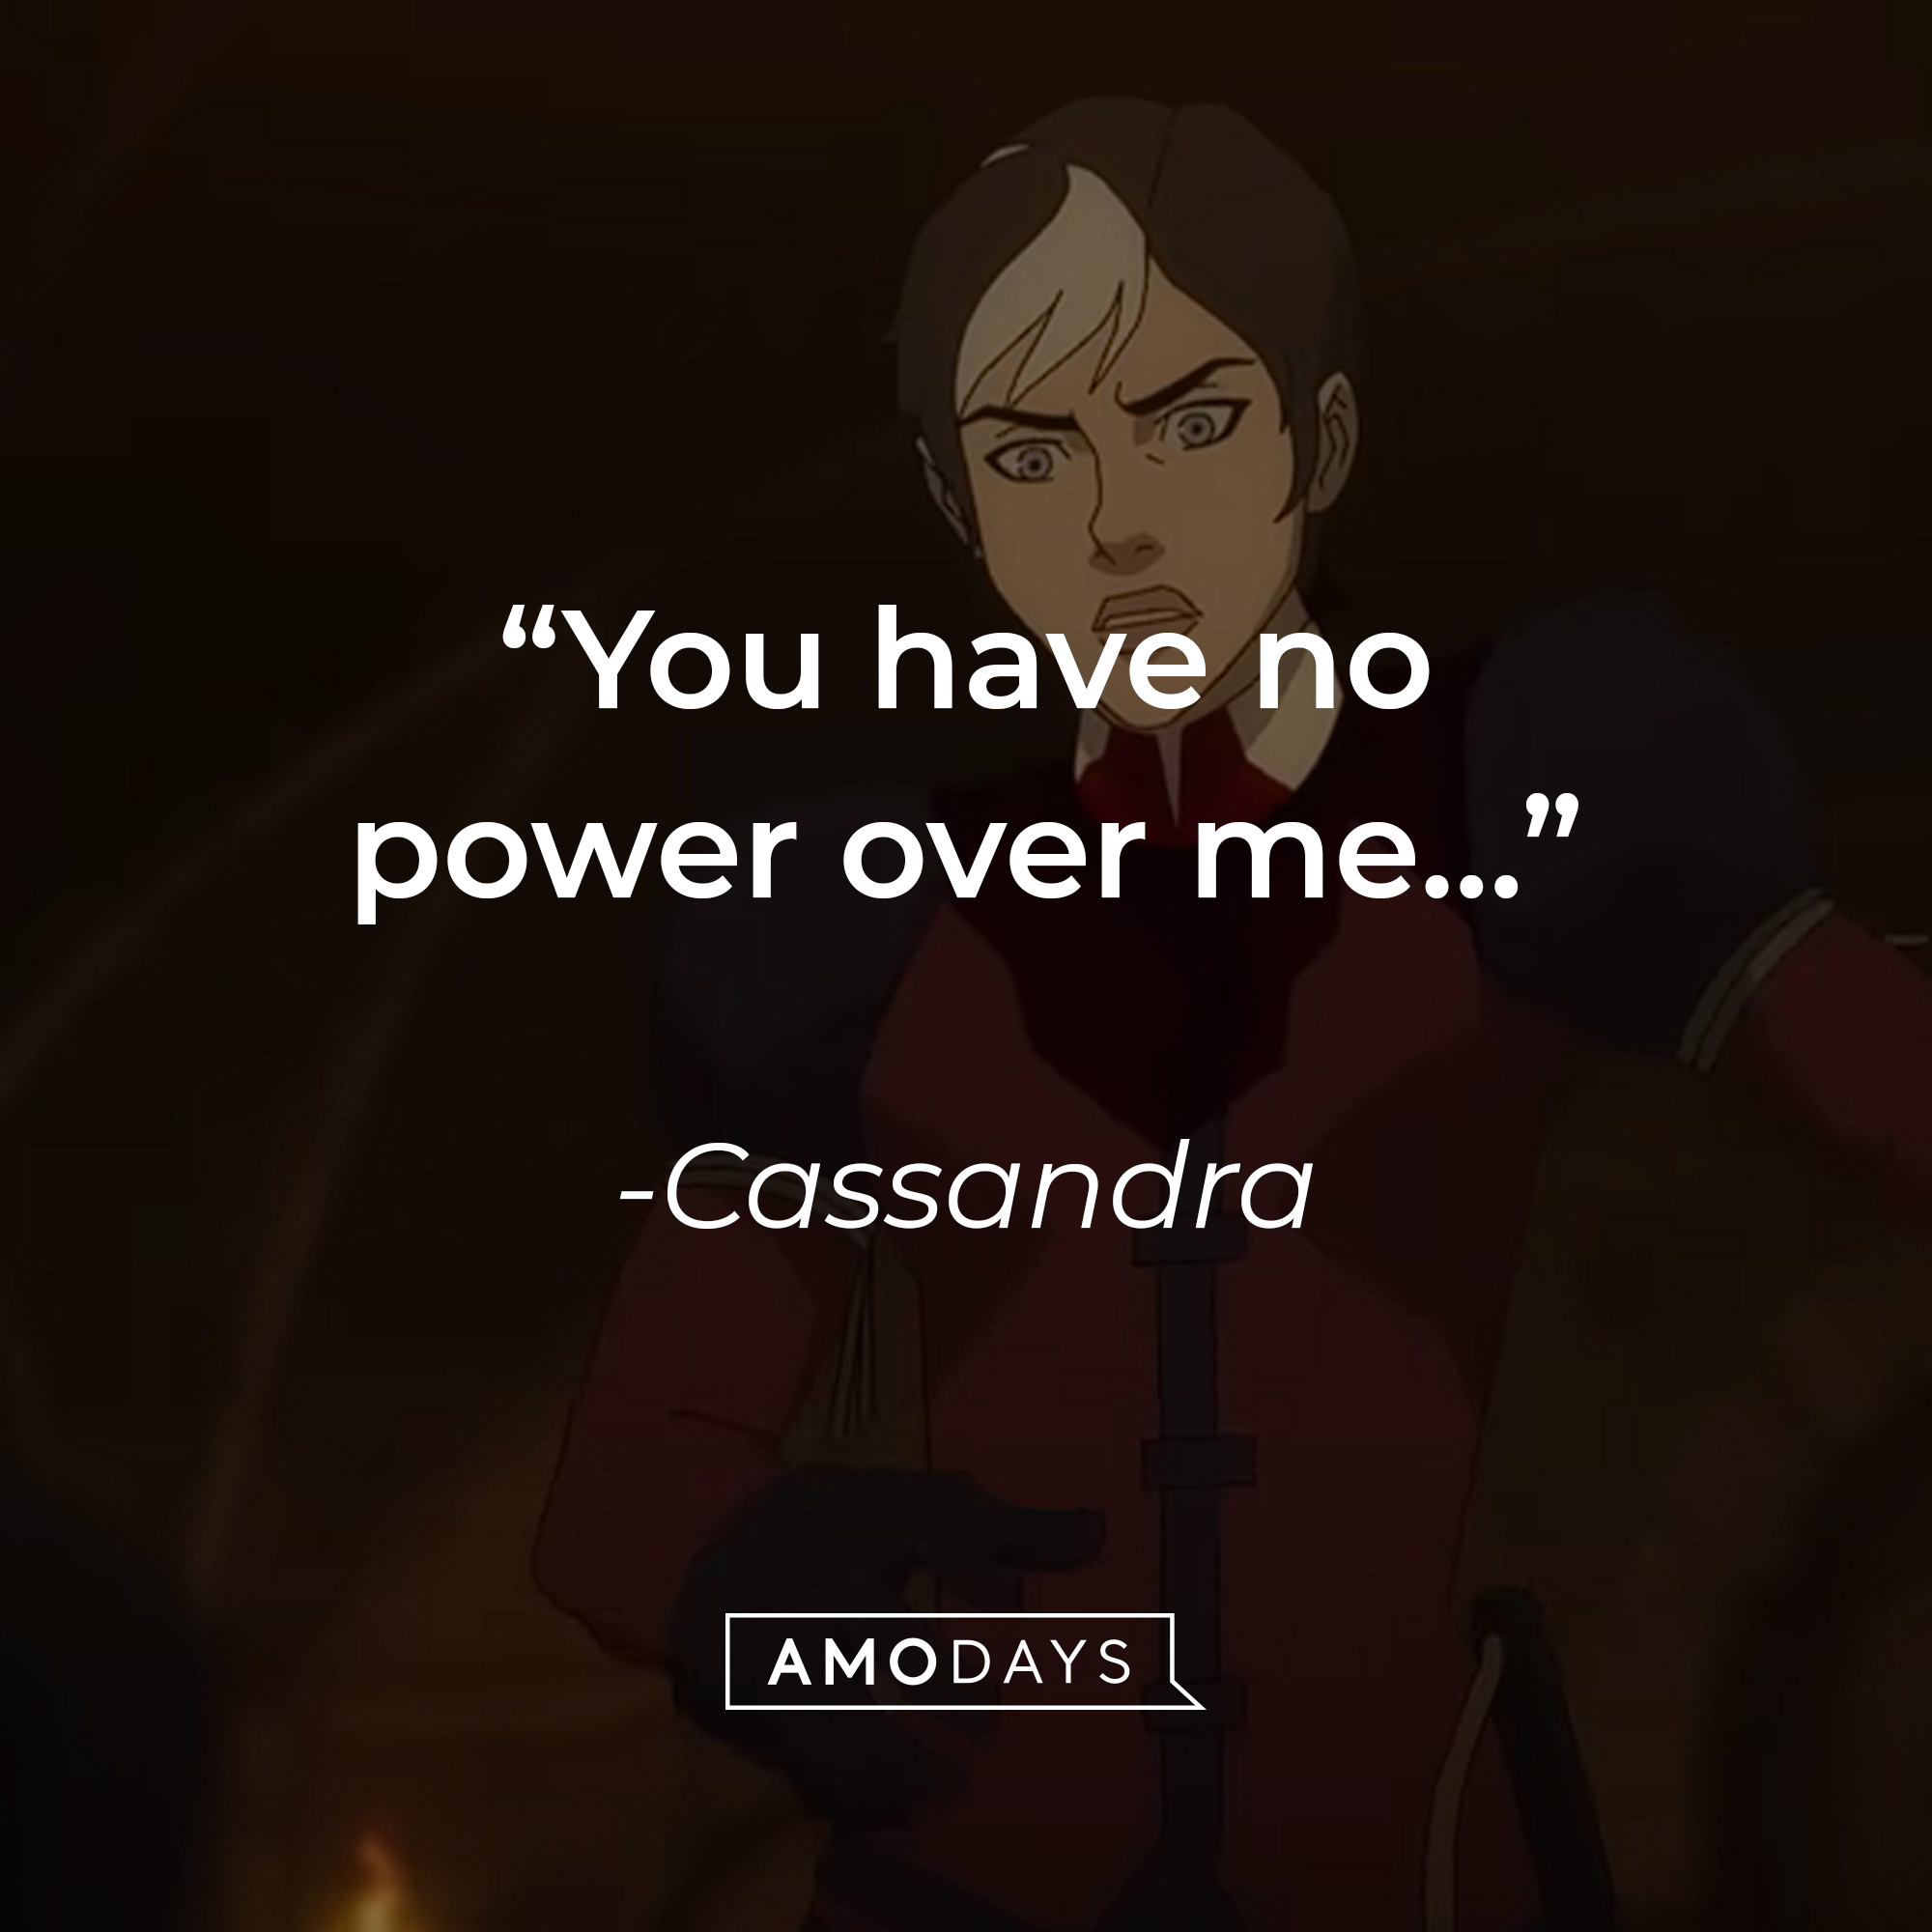 An image of Cassandra  with her quote: “You have no power over me…” | Source: youtube.com/PrimeVideo